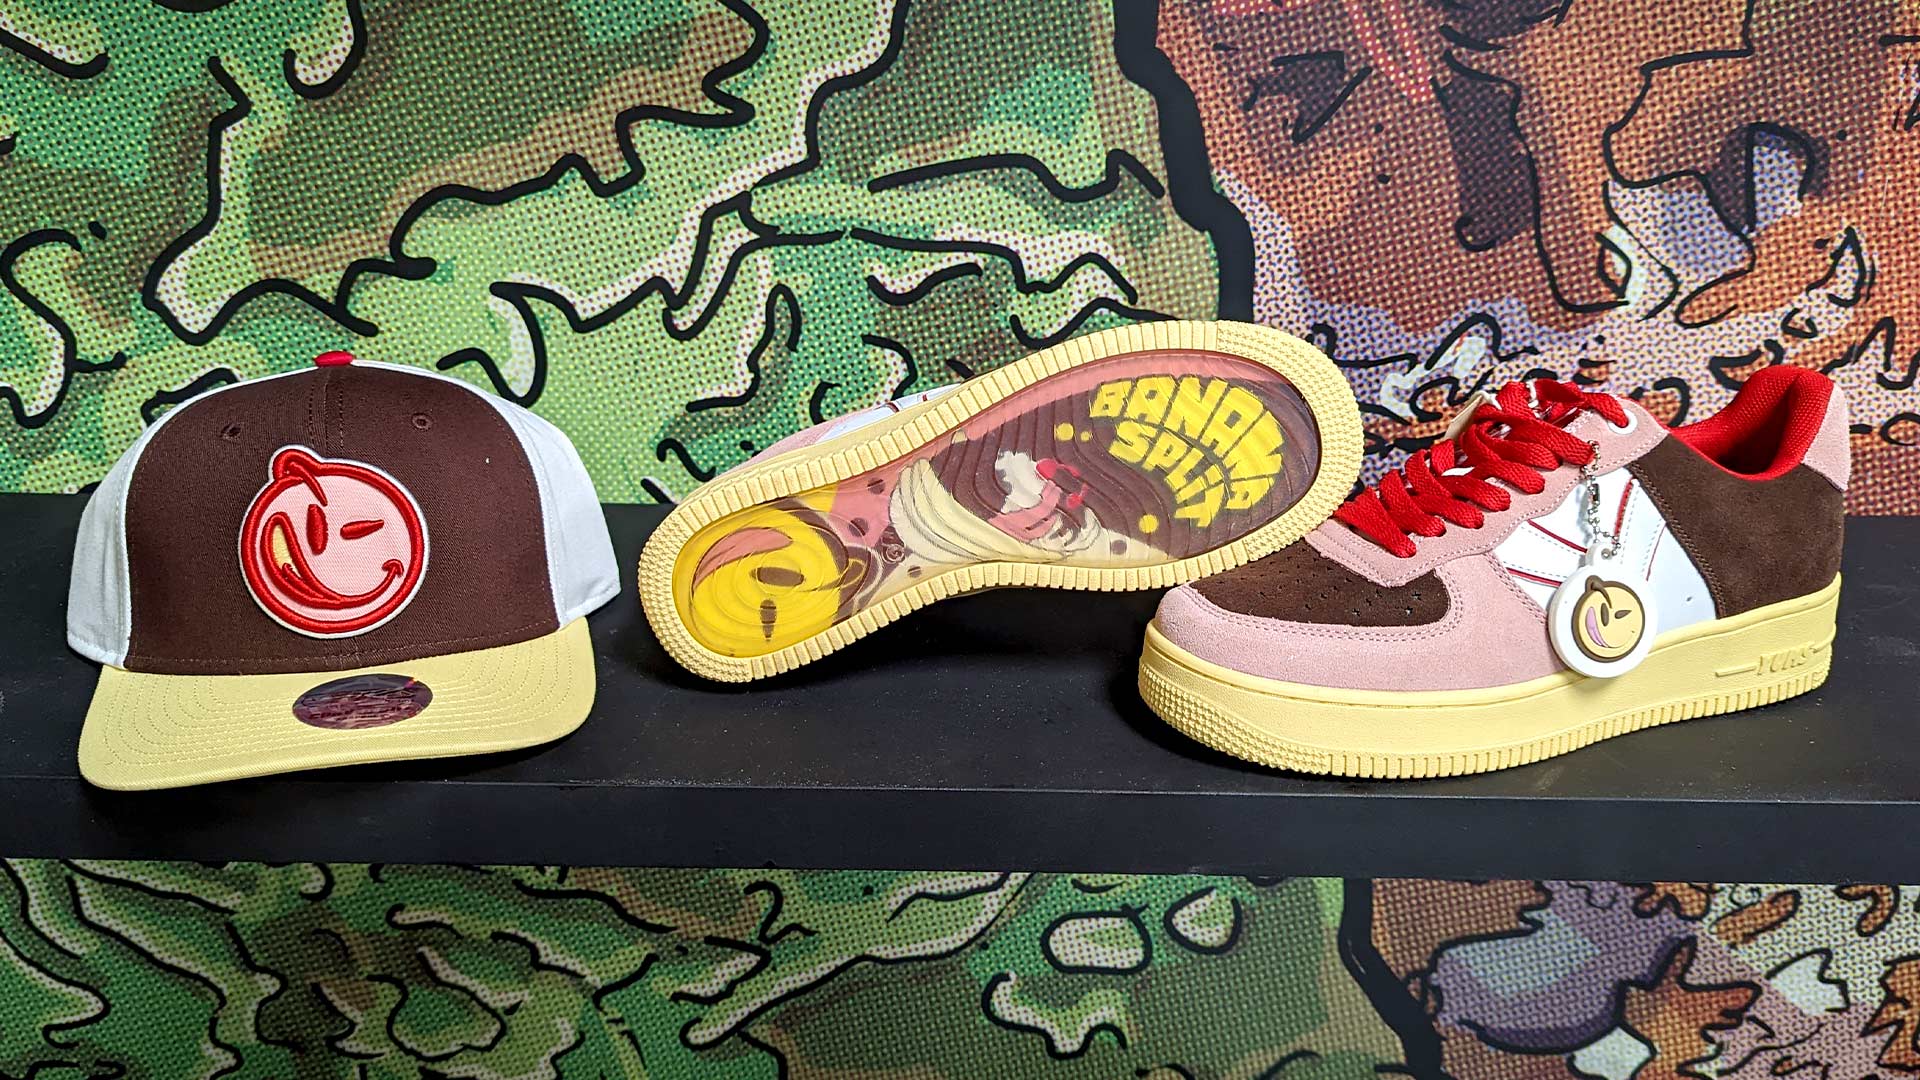 YUMS Sneakers Flavor Banana Split at Dope Street Shoes